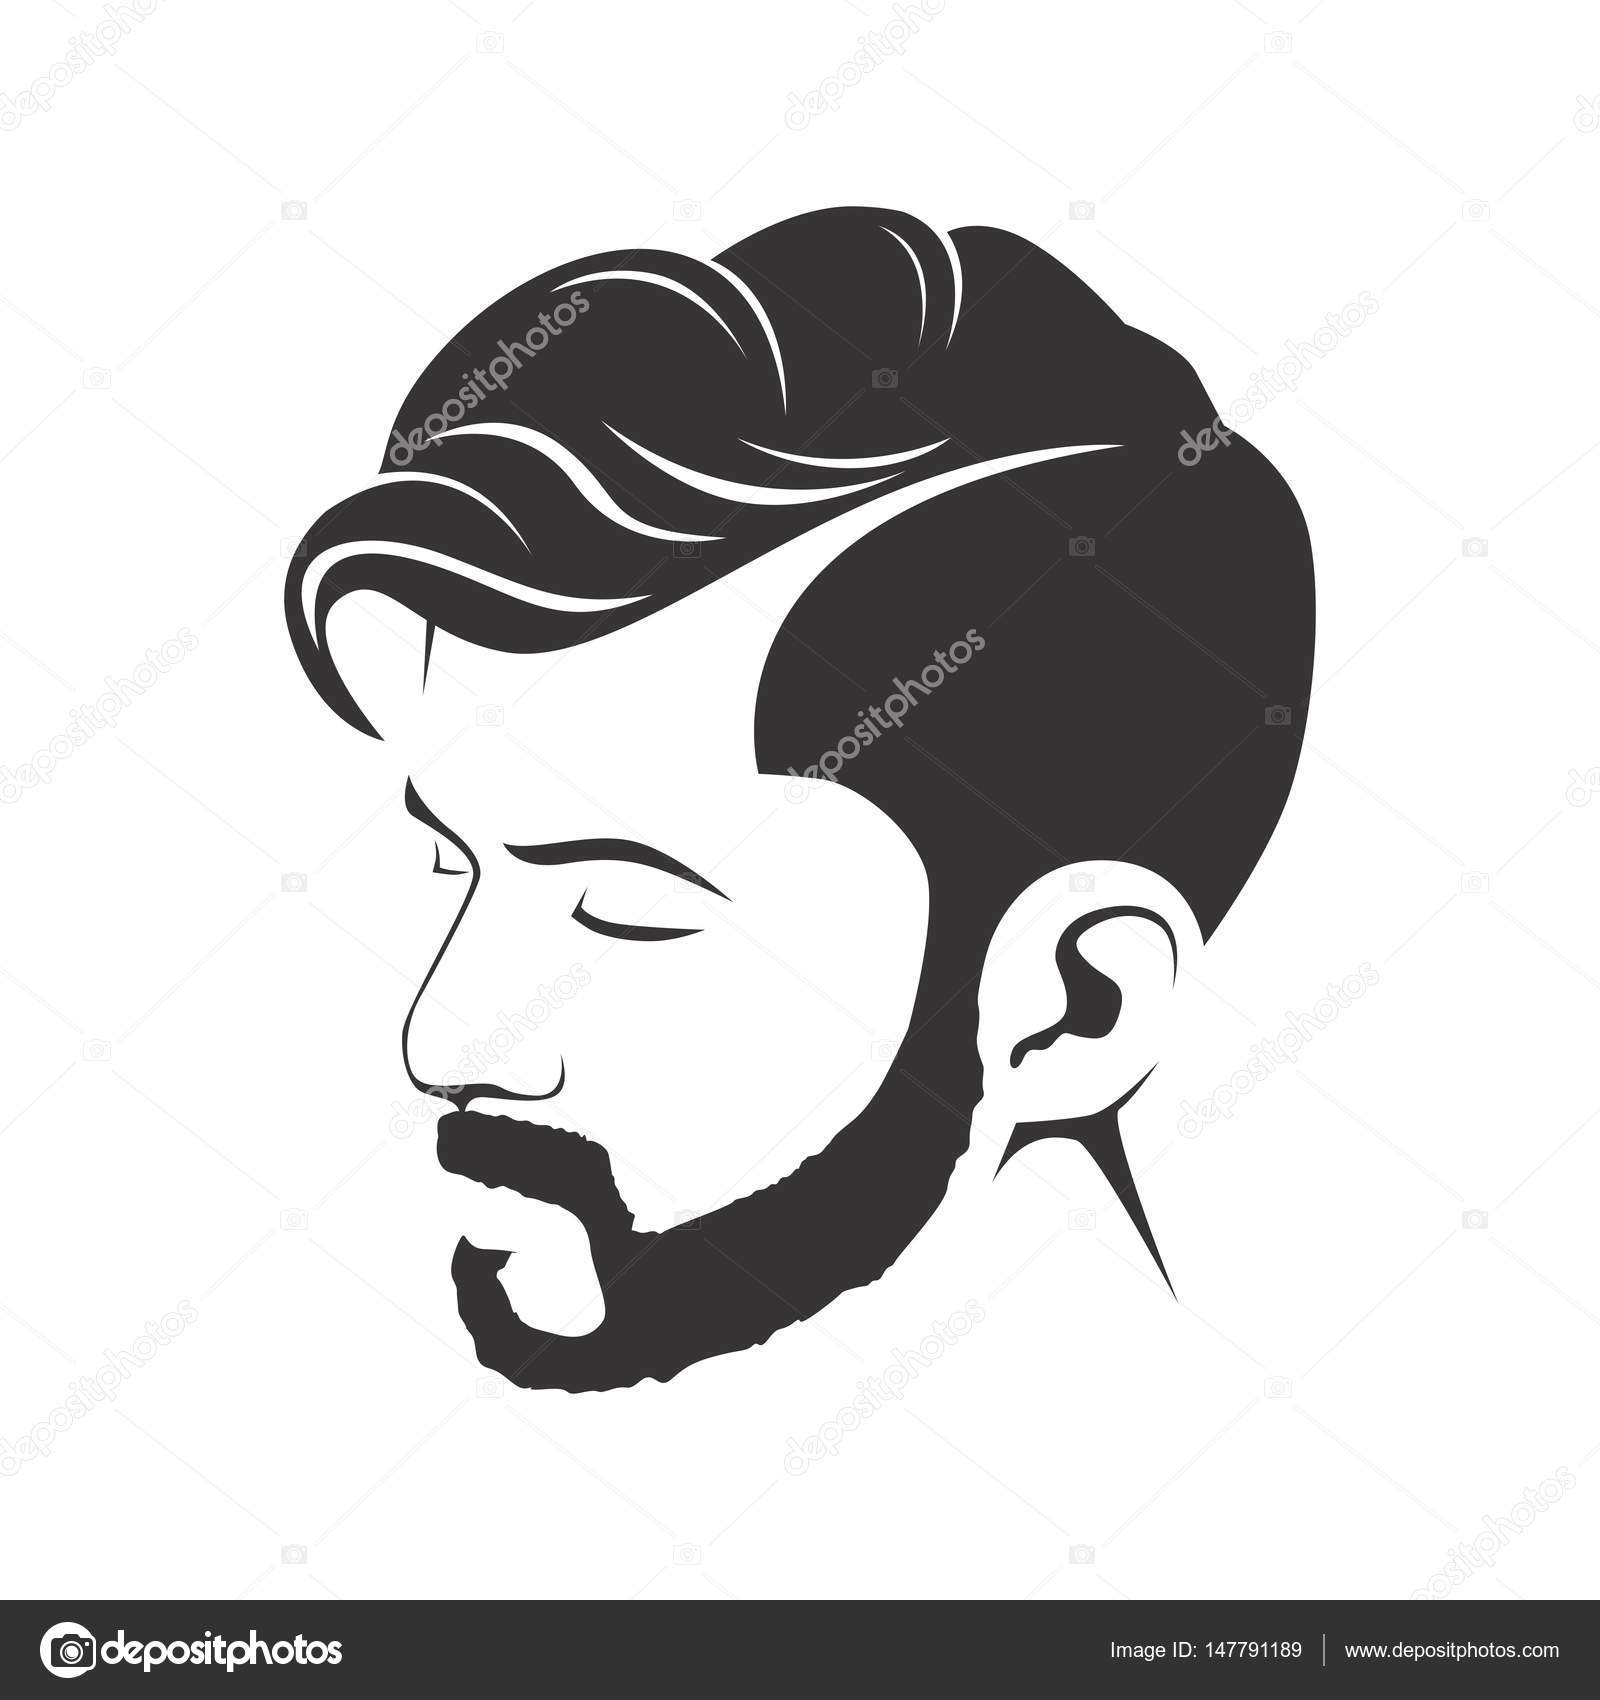 Man Hairstyle: Over 119,610 Royalty-Free Licensable Stock Vectors & Vector  Art